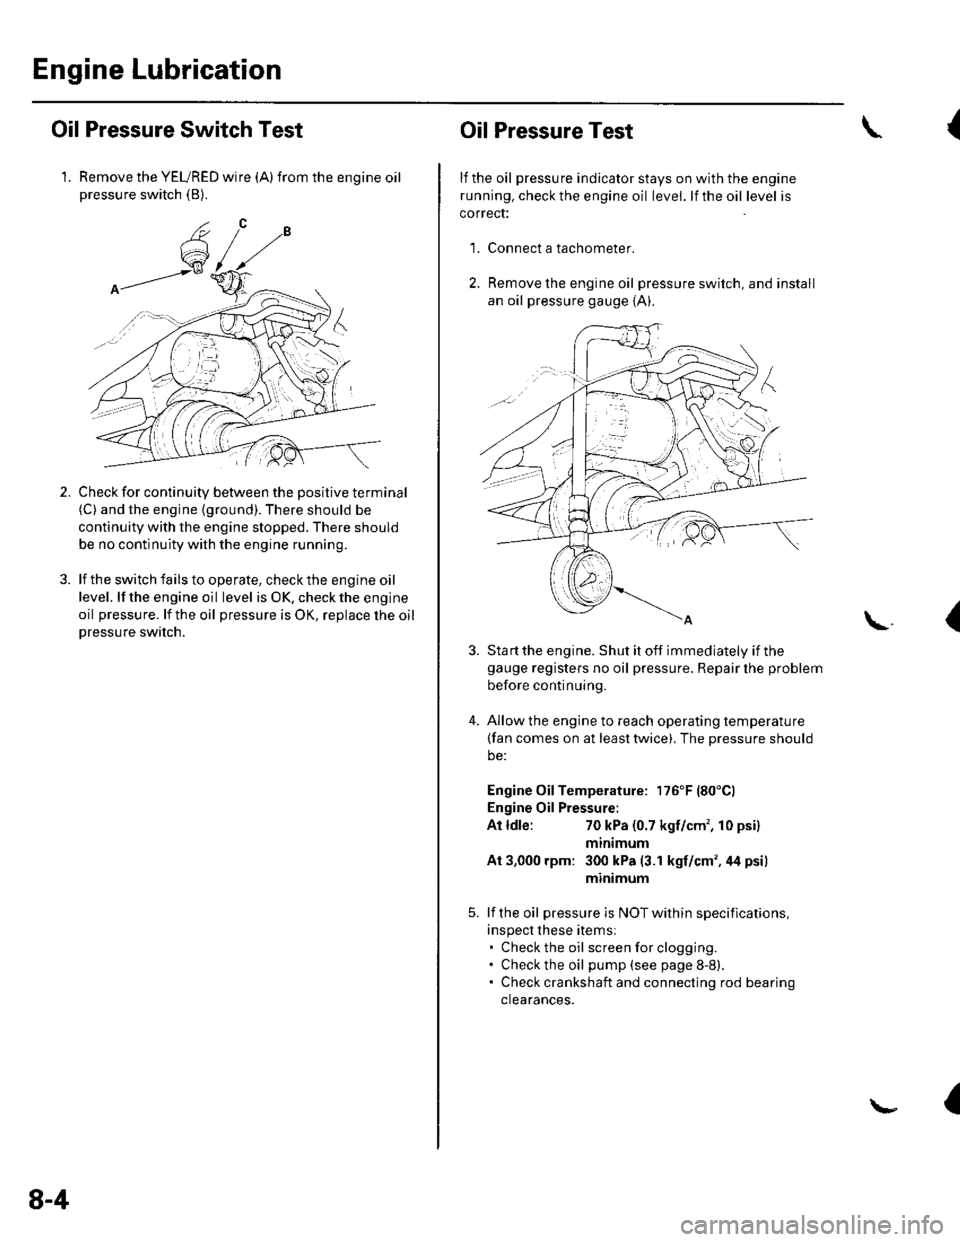 HONDA CIVIC 2003 7.G Workshop Manual Engine Lubrication
Oil Pressure Switch Test
1. Remove the YEURED wire (A)from the engine oilpressure switch (B).
Check for continuity between the positive terminal(C) and the engine (ground). There sh